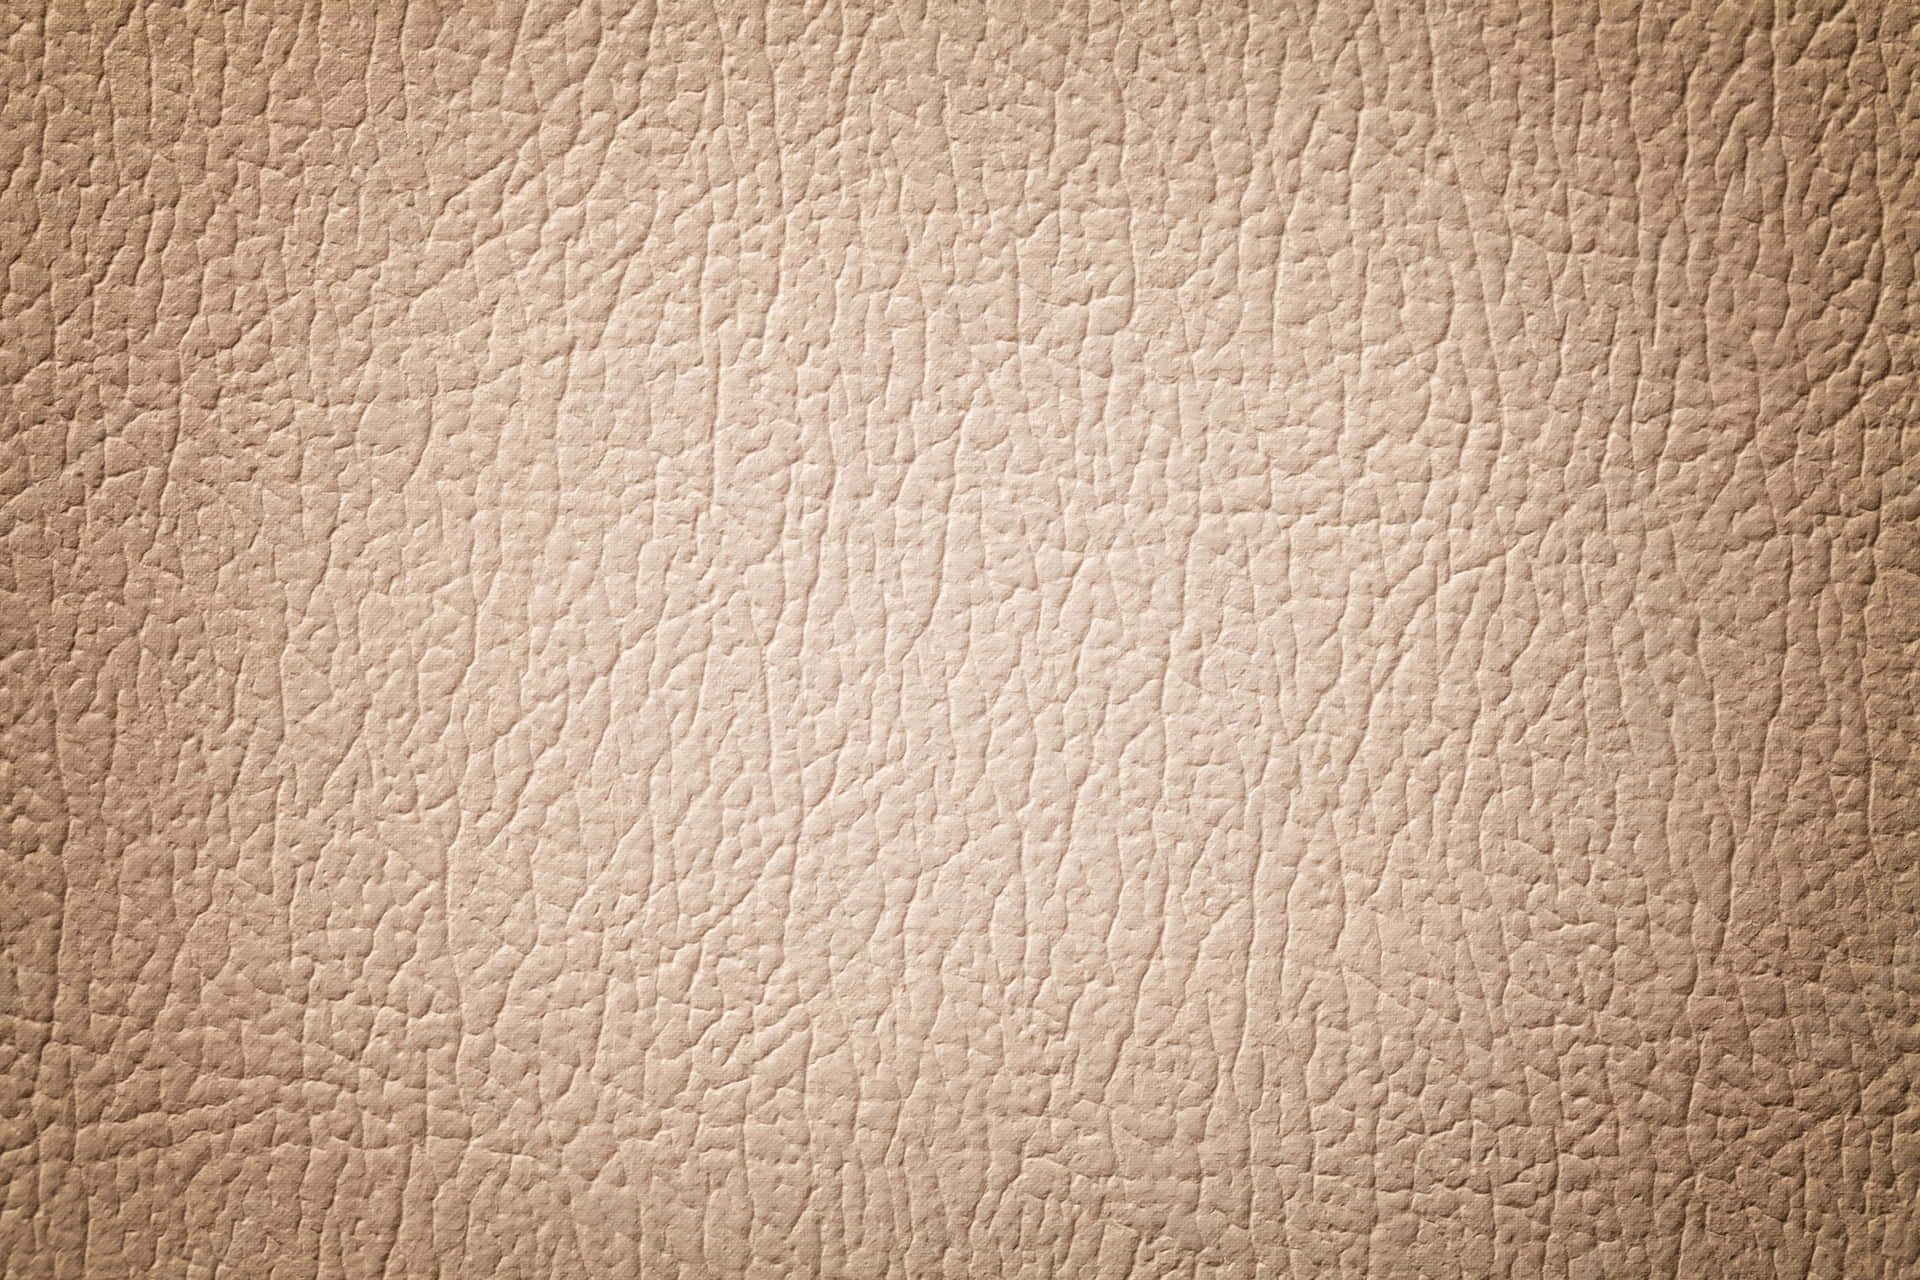 Free Leather Texture Wallpaper Downloads, [100+] Leather Texture Wallpapers  for FREE 